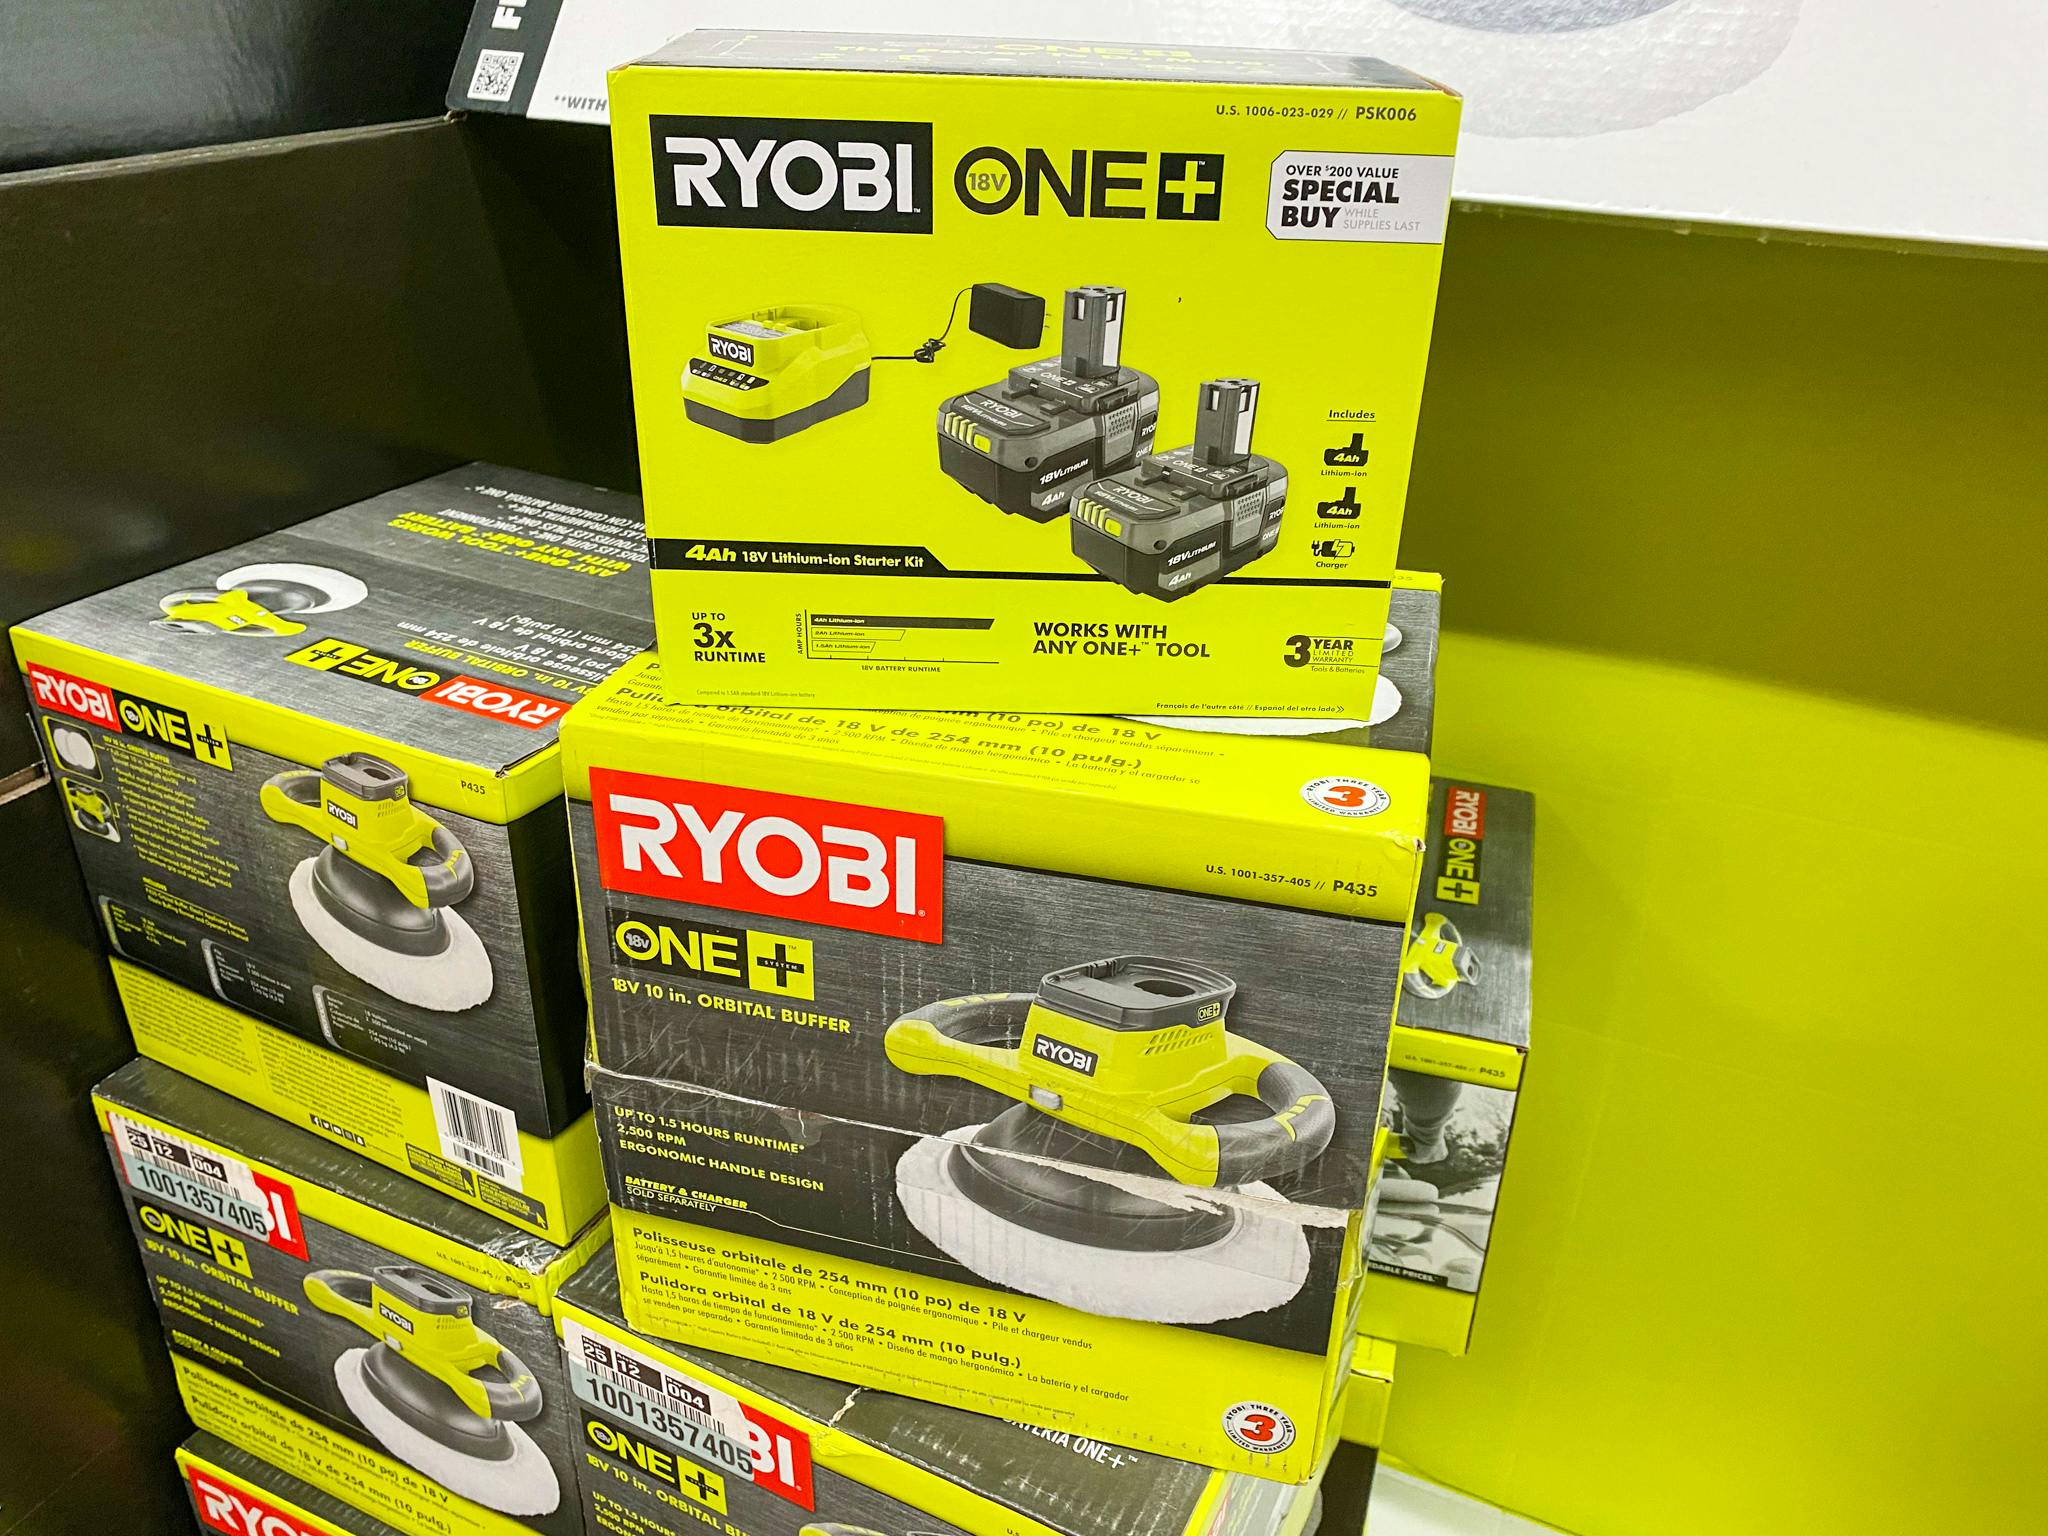 Free Tool With Ryobi Purchase At Home Depot The Krazy Coupon Lady